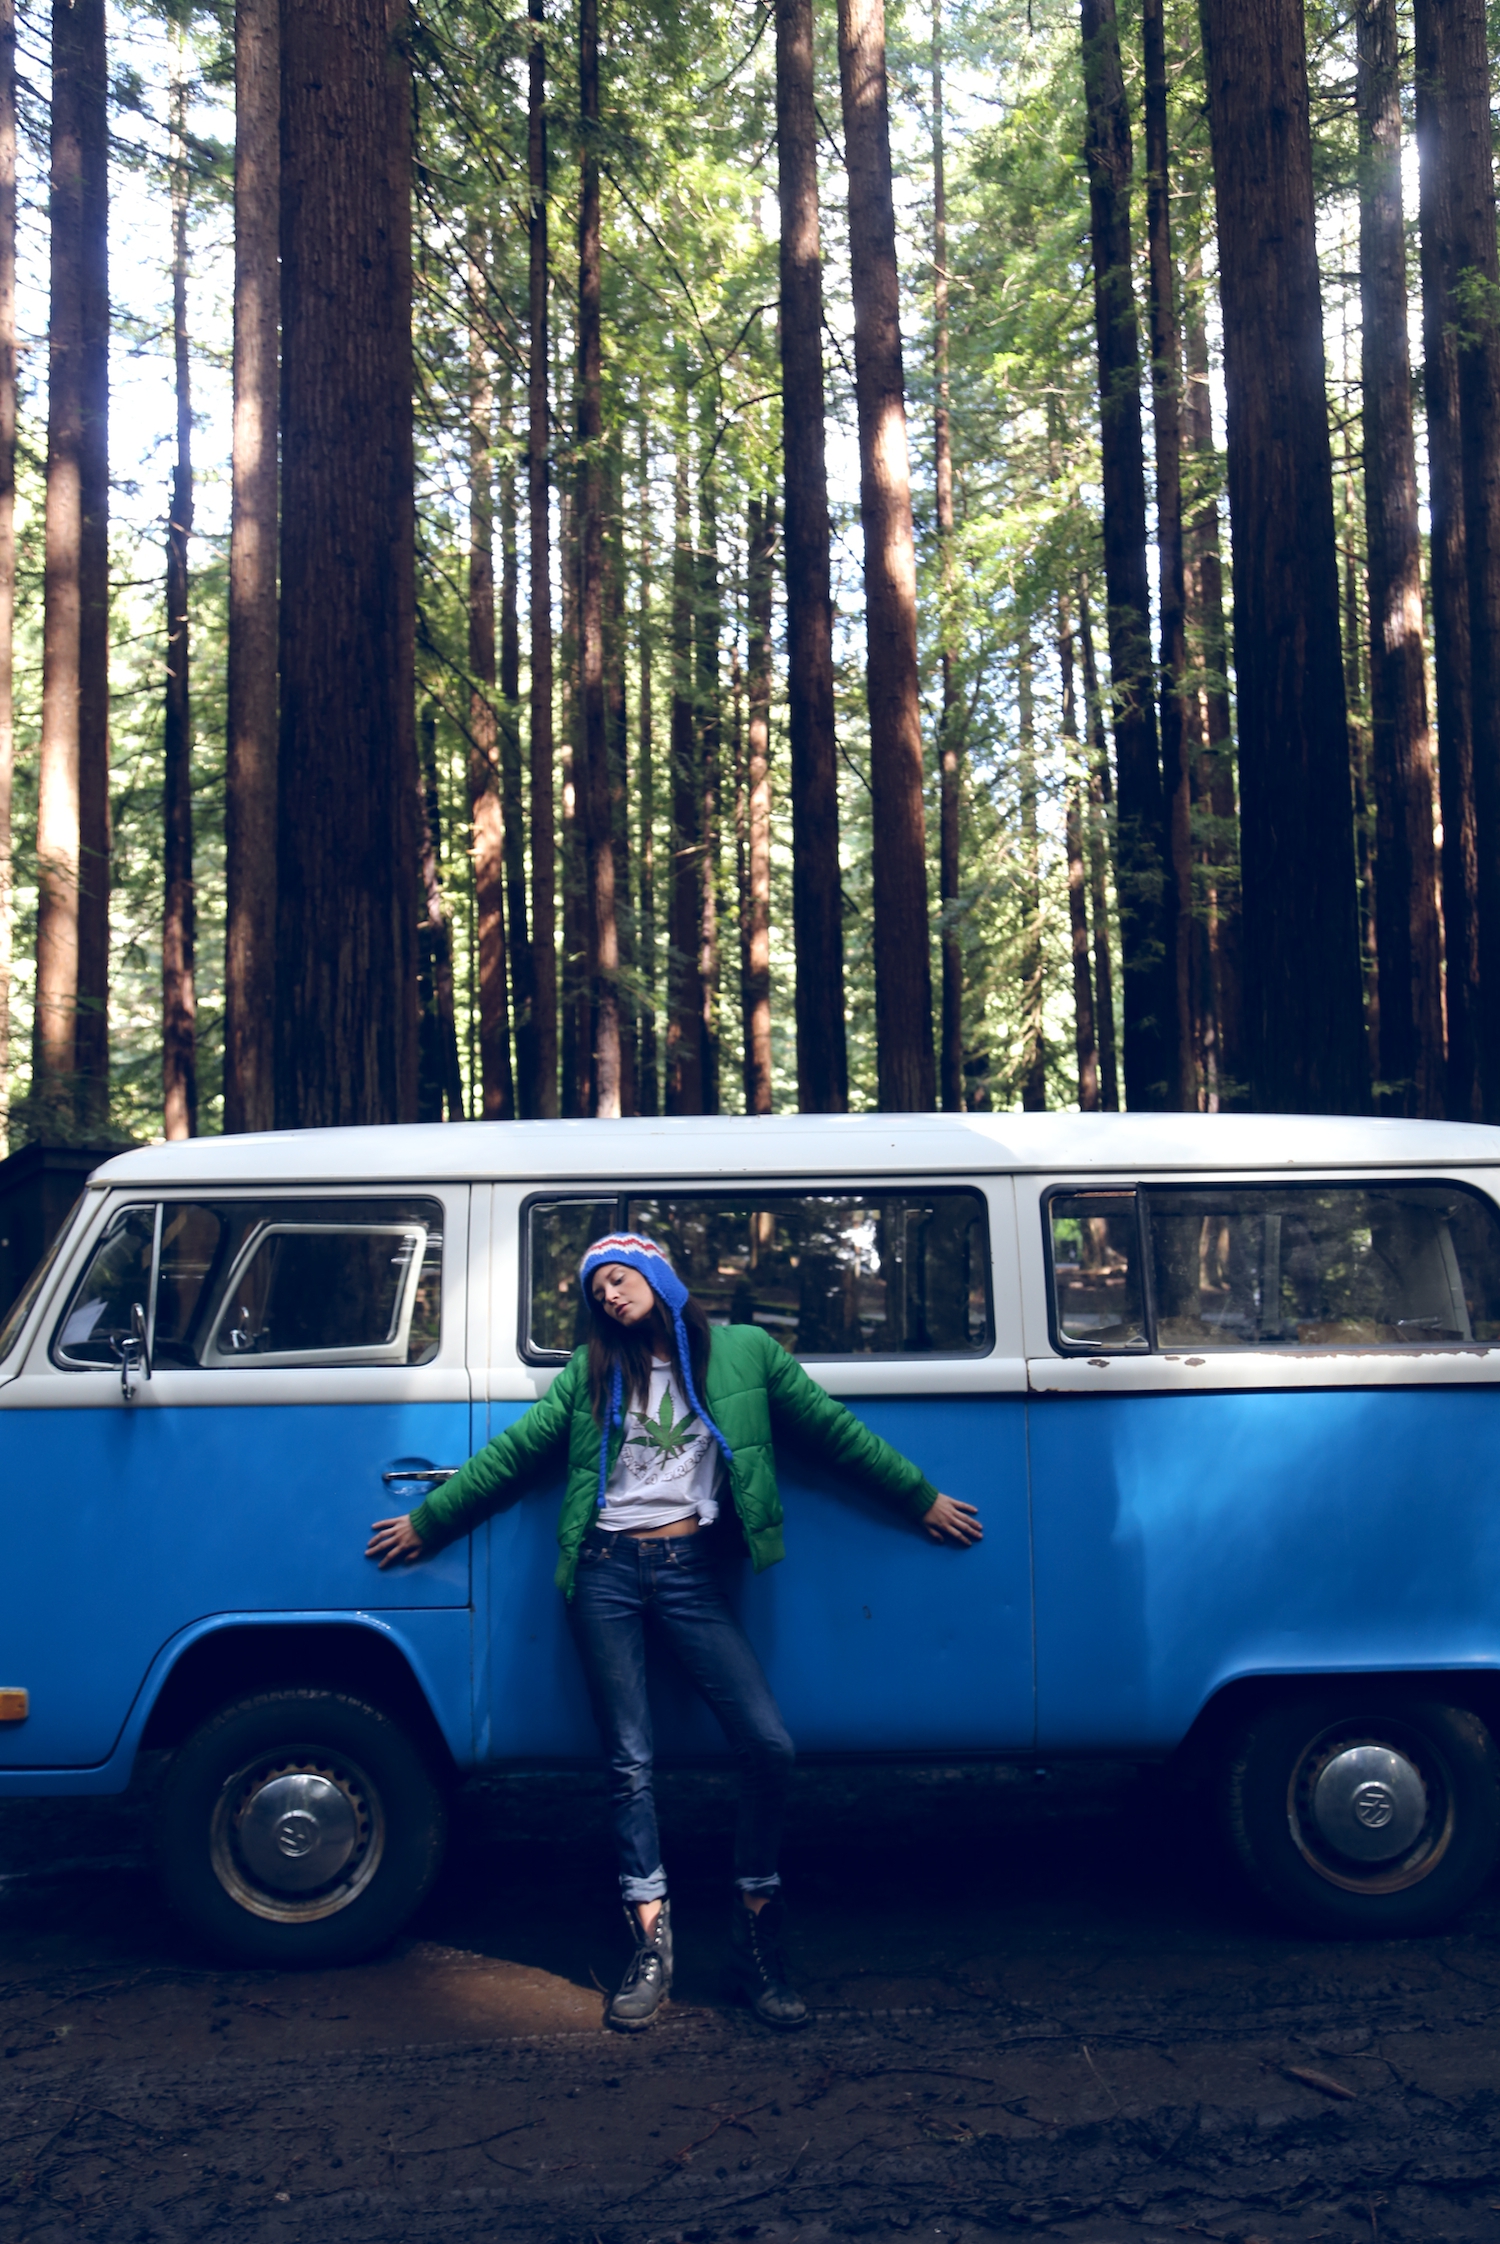 vw bus, vintage, camping, millennial, clamping, redwoods national park, lifestyle  camping, road trip,heather van gaale, lifestyle photographer, natural images, in the moment, camping, road trip